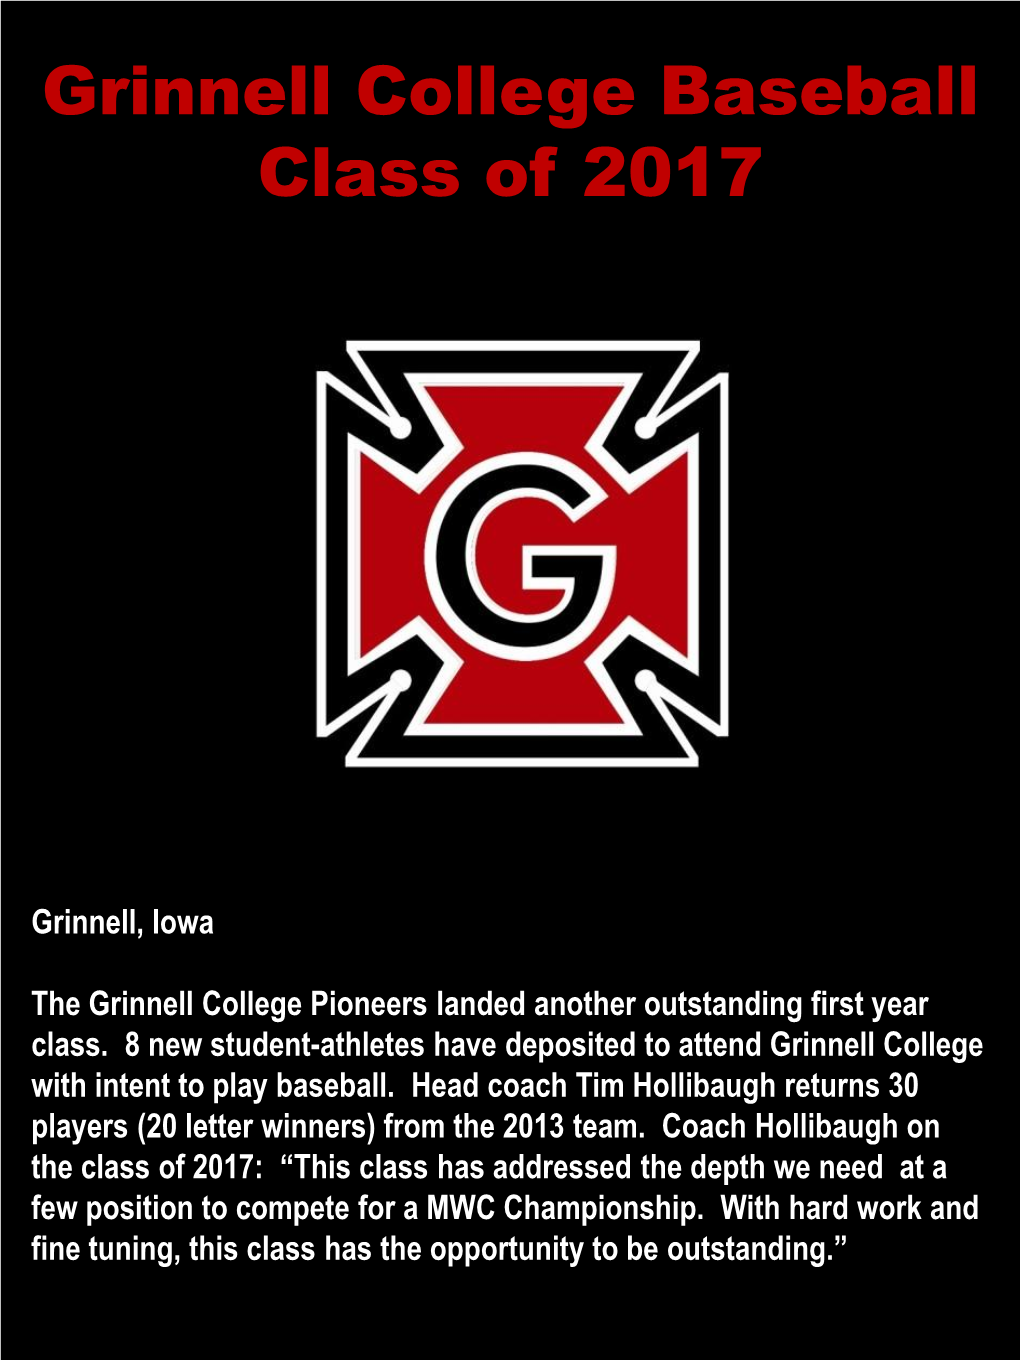 Grinnell College Baseball Class of 2017